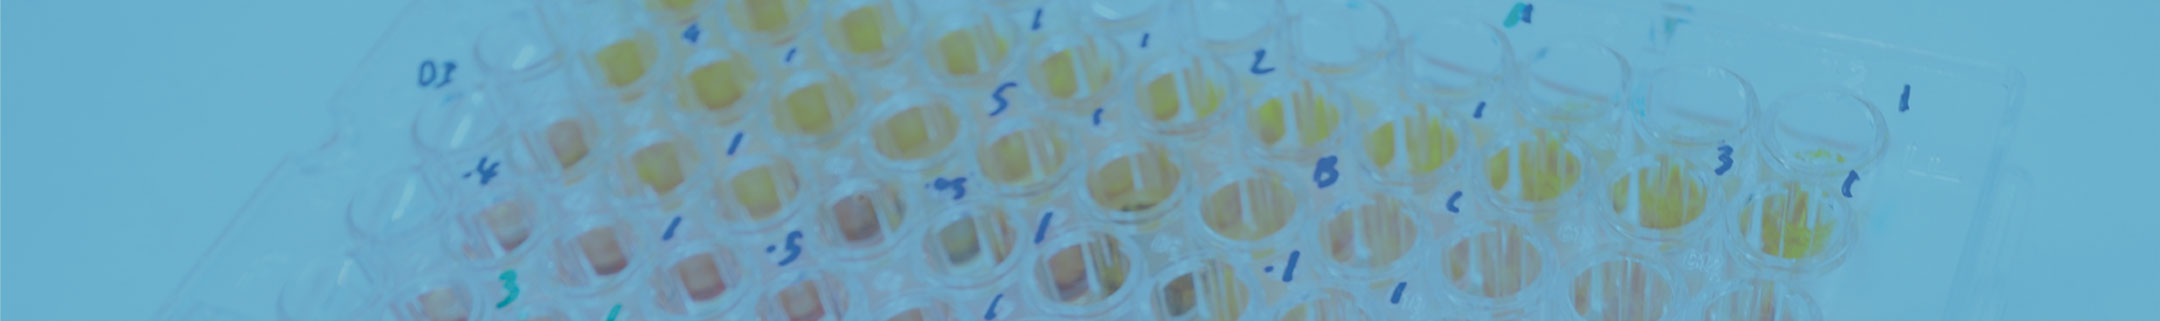 Tissue Culture Multiwell Plates